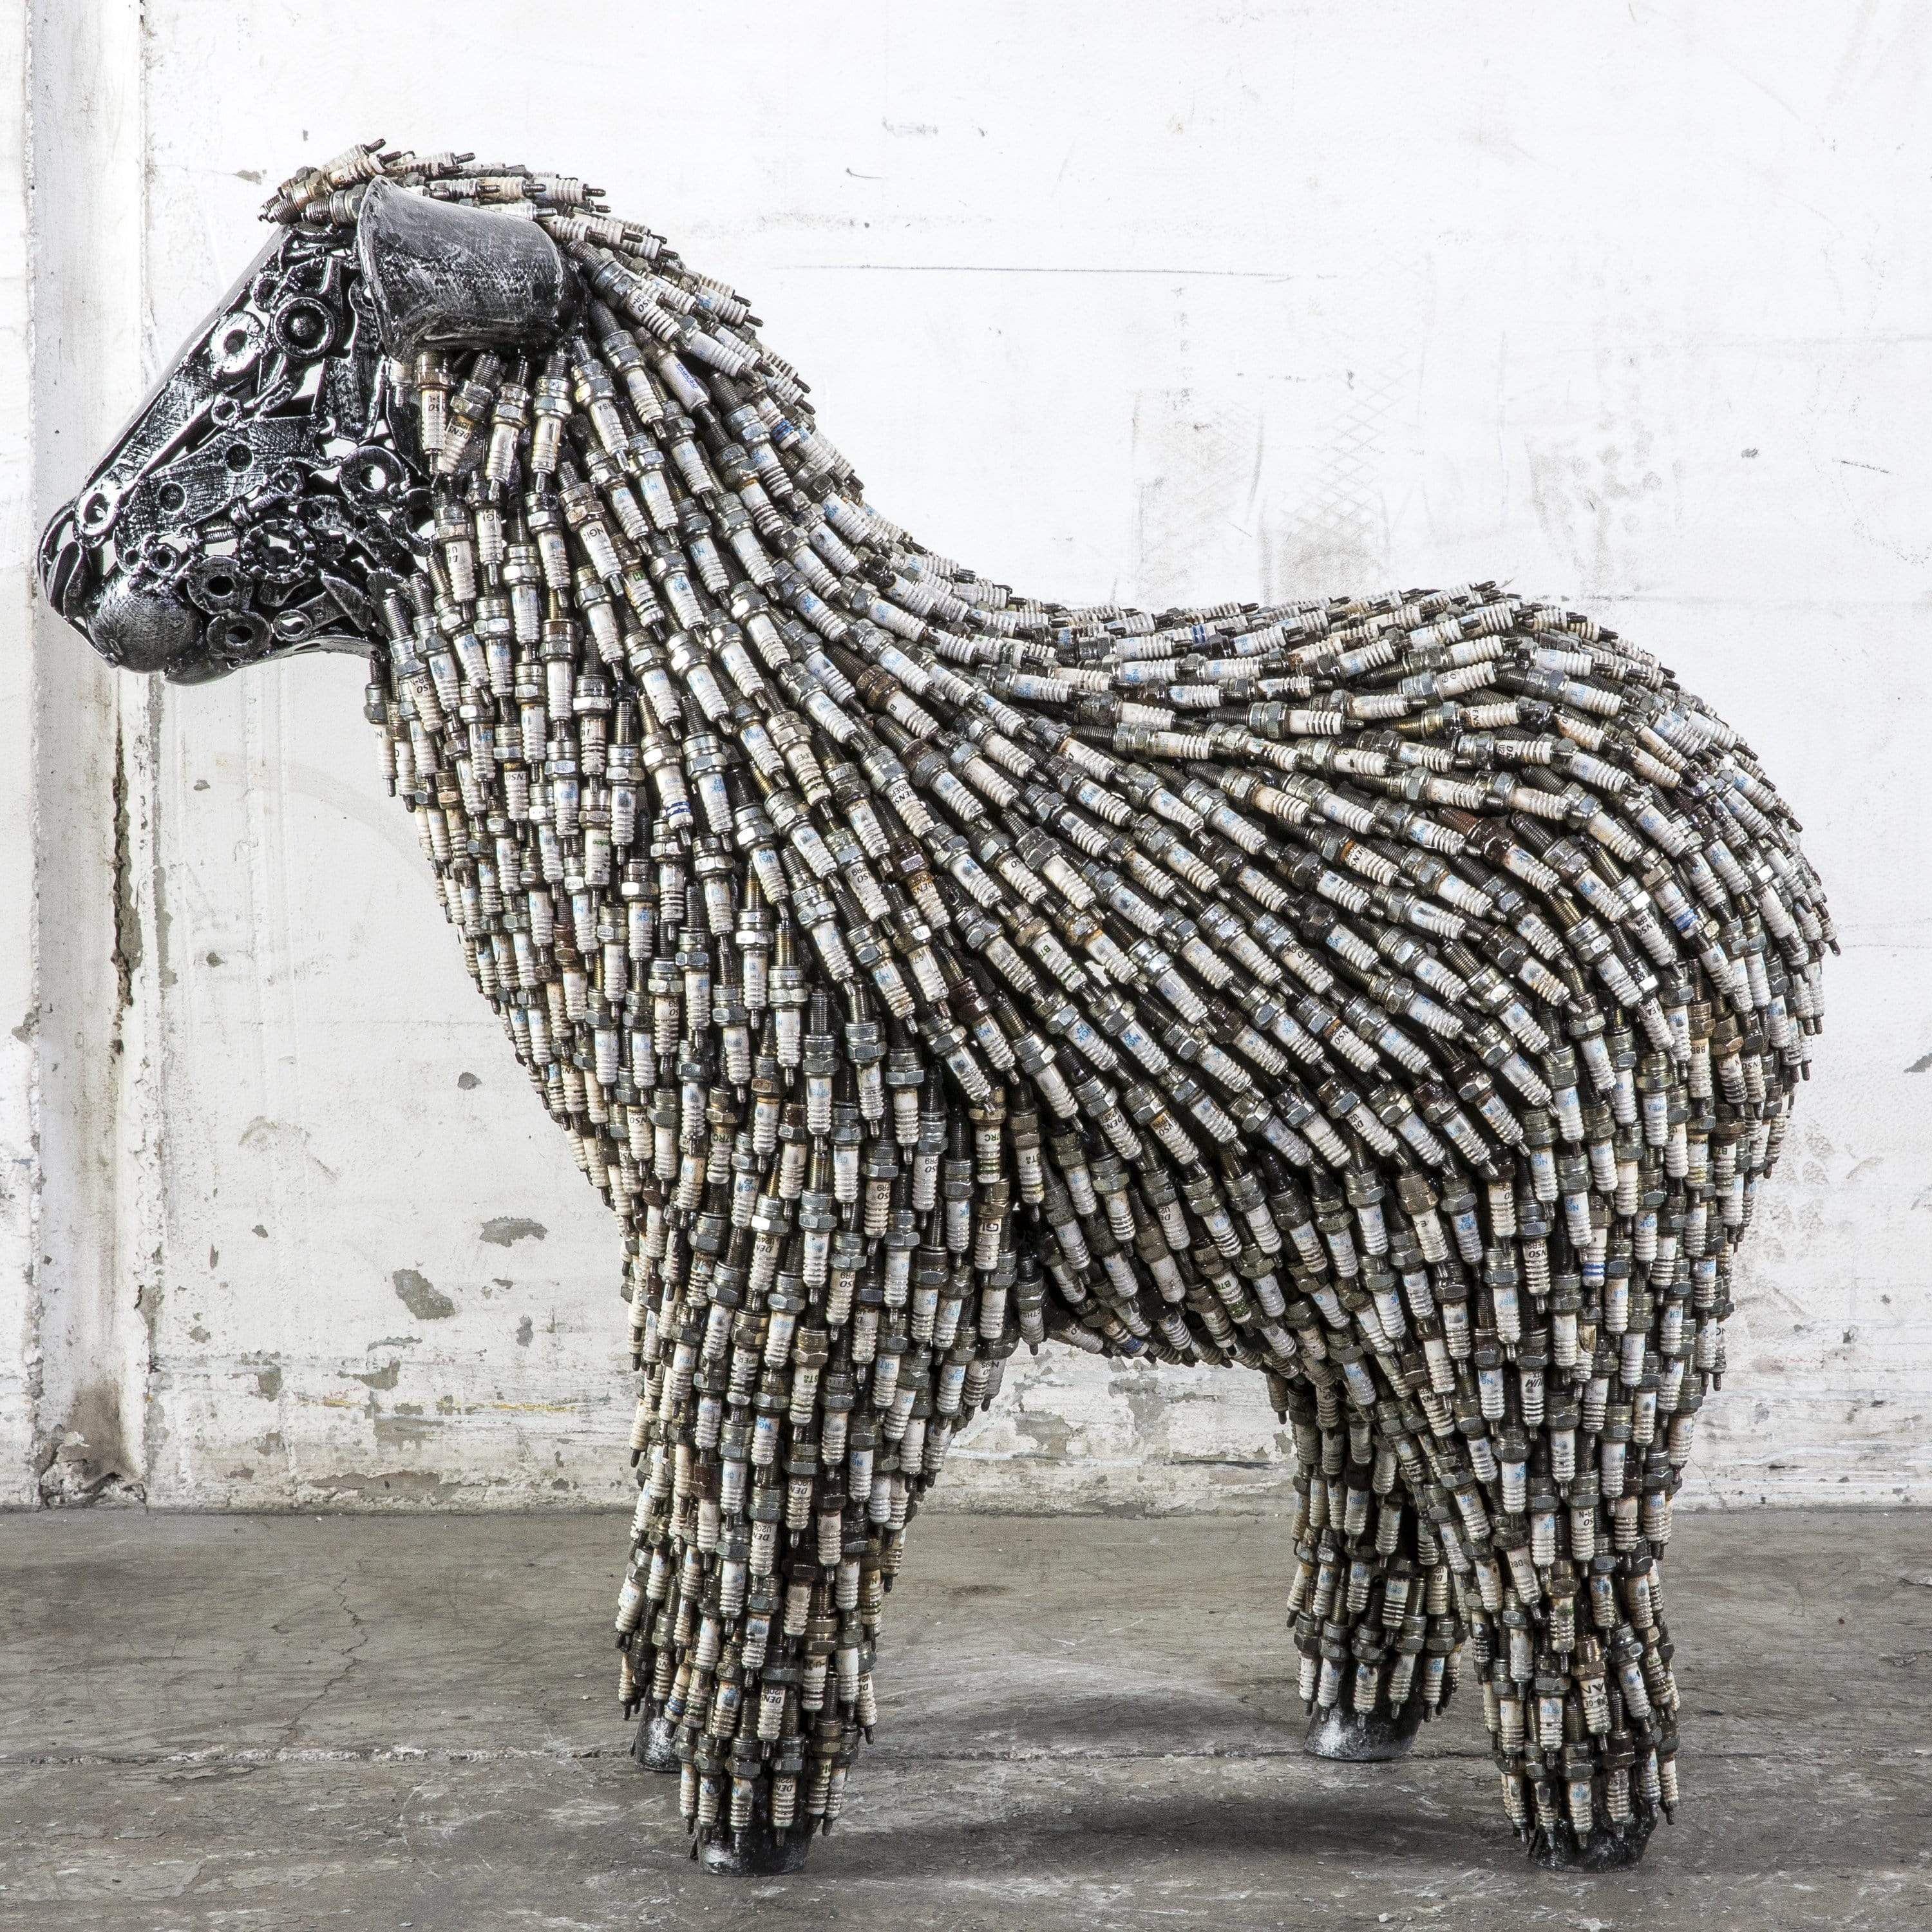 Kalifano Recycled Metal Art 30" Spark Plug Sheep Inspired Recycled Metal Sculpture RMS-S75x80-P